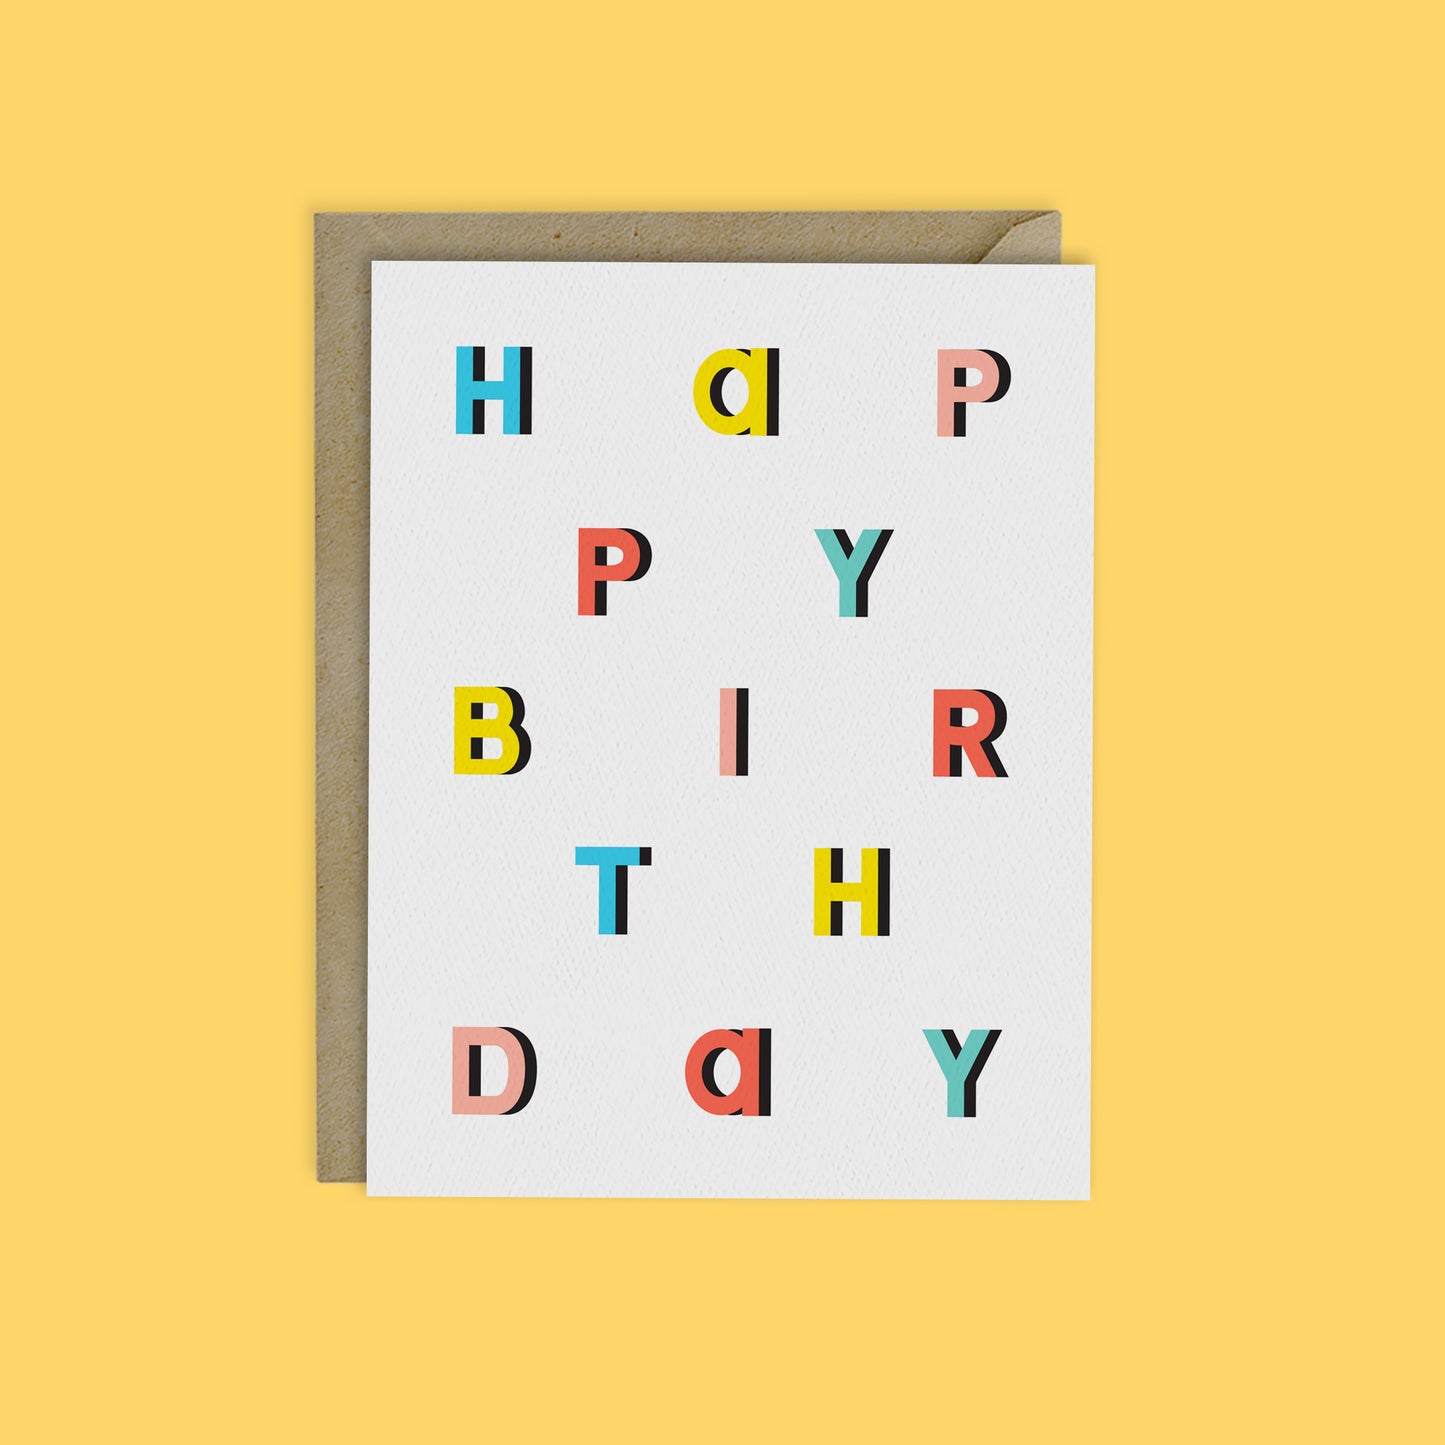 HAPPY BIRTHDAY CARD - Modern Colorful Typography